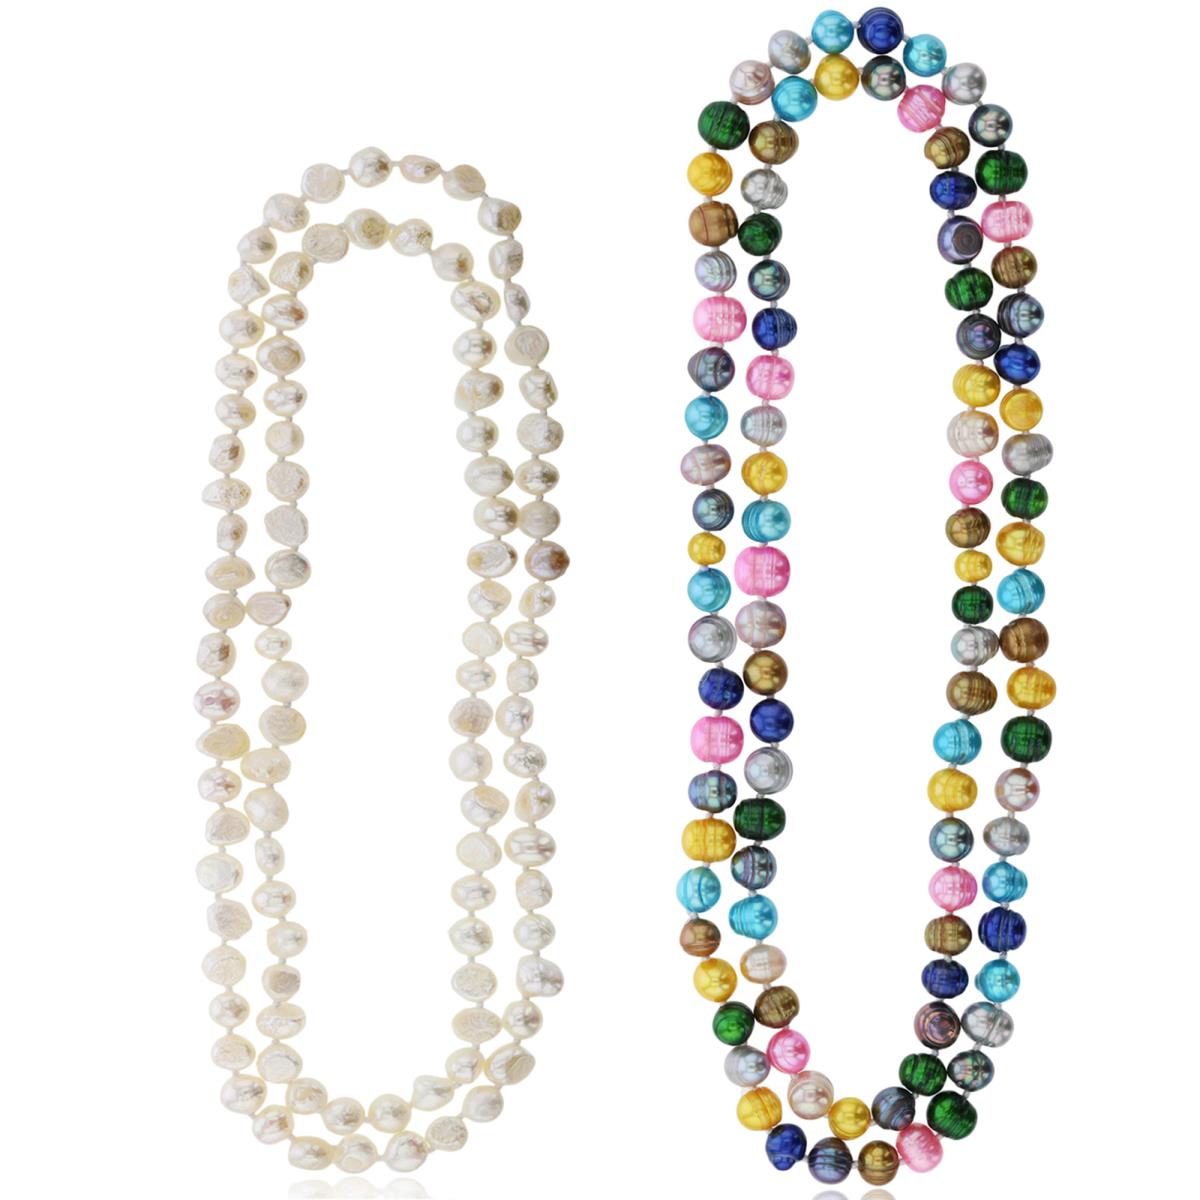 8-9mm Assorted Fresh Water Pearls 30" & Multi Color Fresh Water Pearls 36" Necklace Set